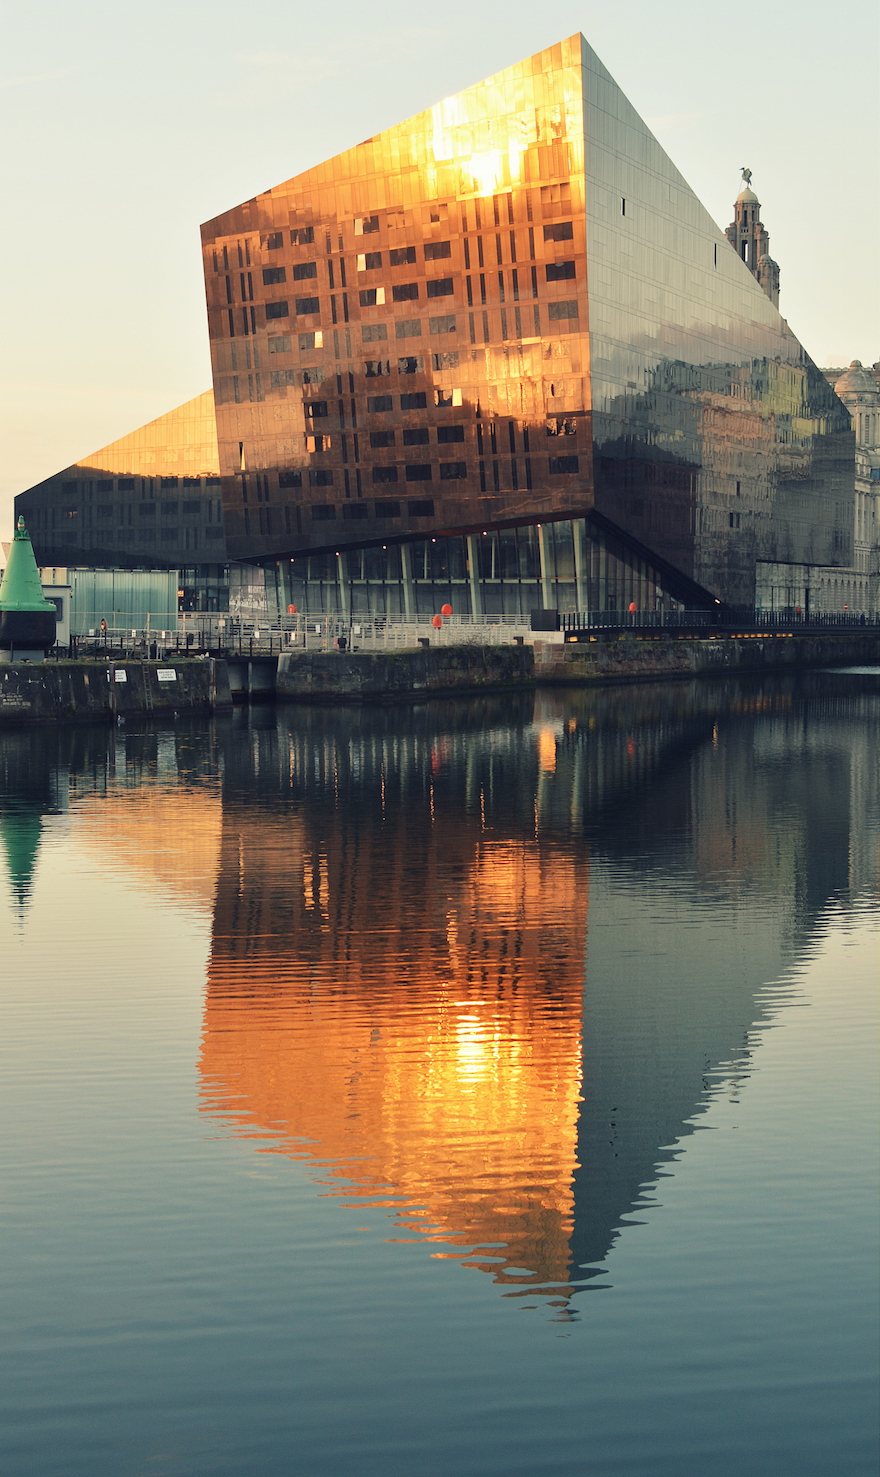 Canning dock – Architecture